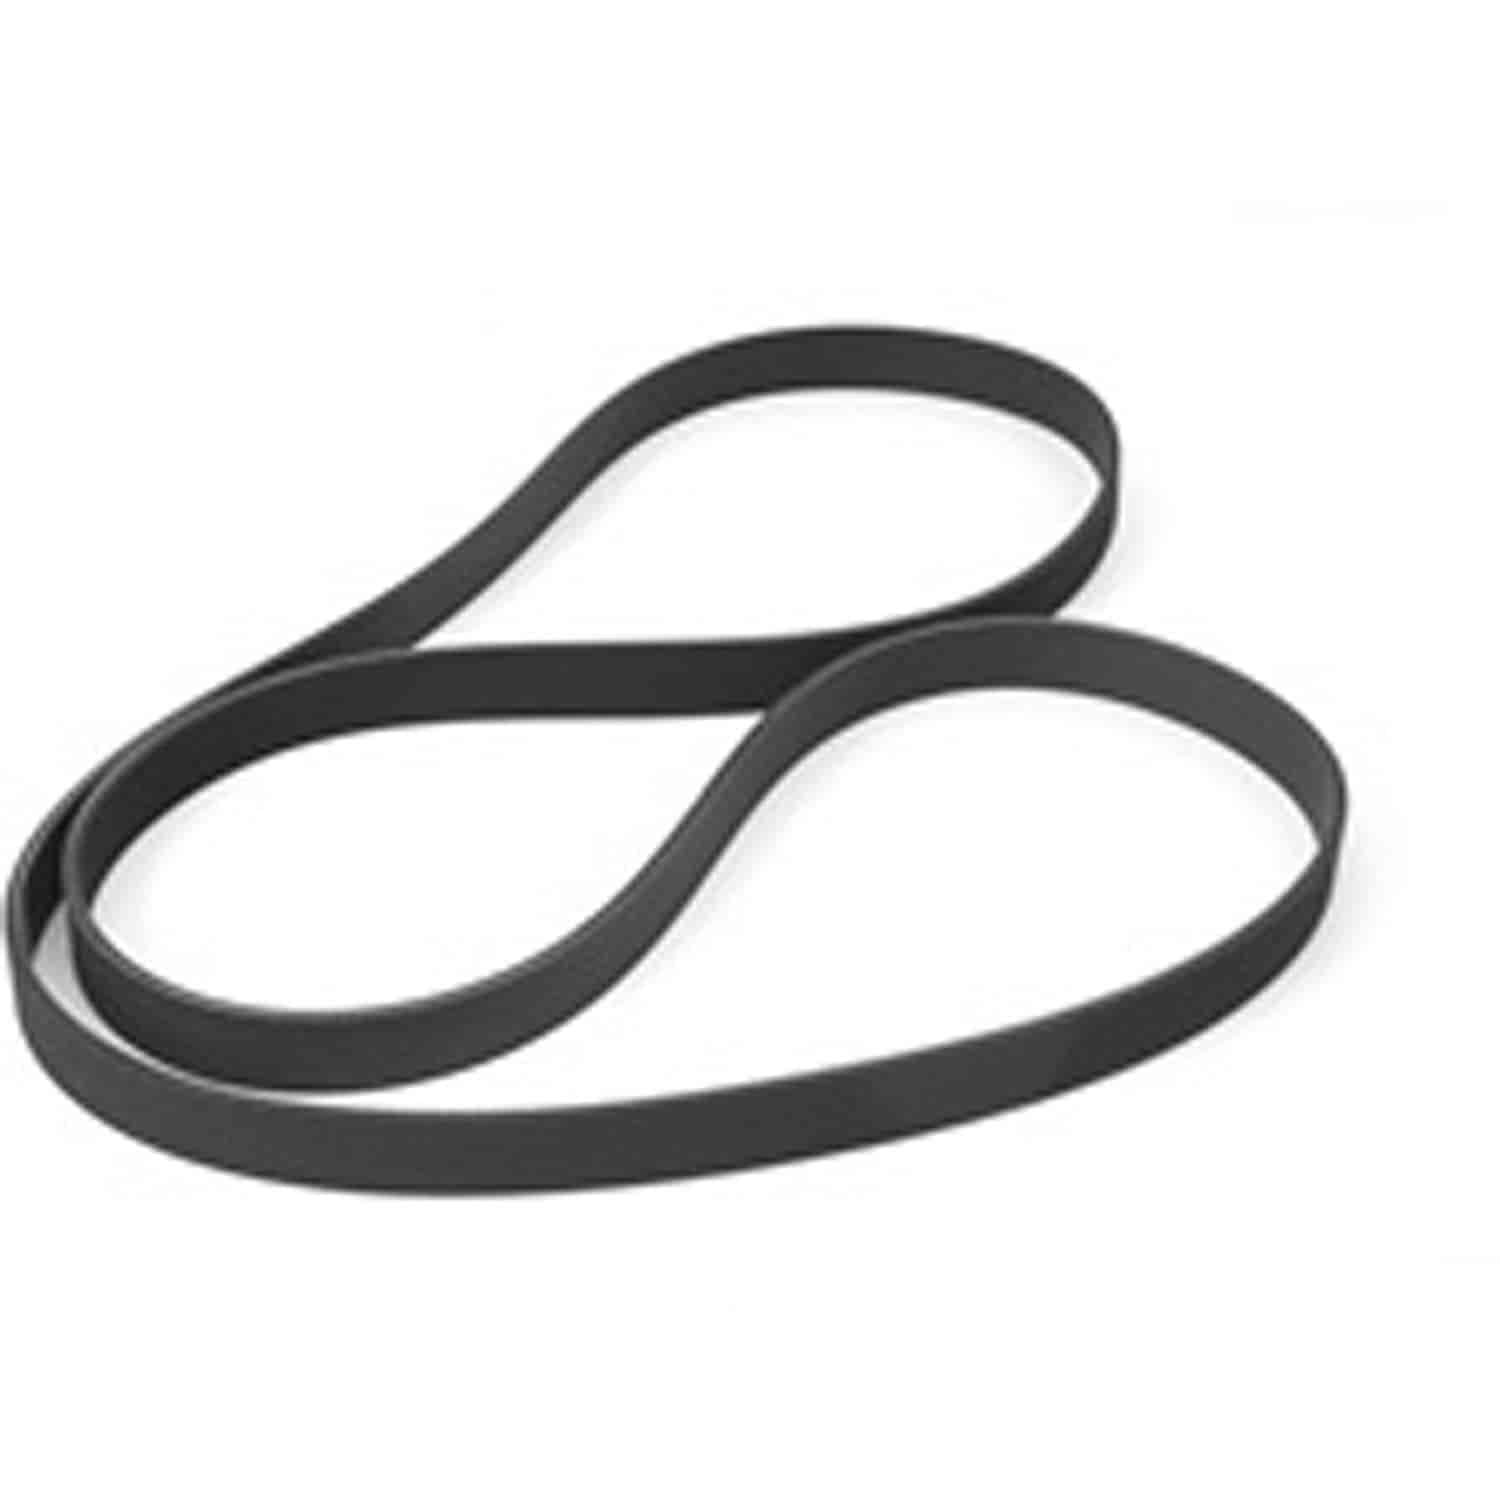 This serpentine belt from Omix-ADA fits 09-10 Jeep Grand Cherokees with a 5.7L engine.